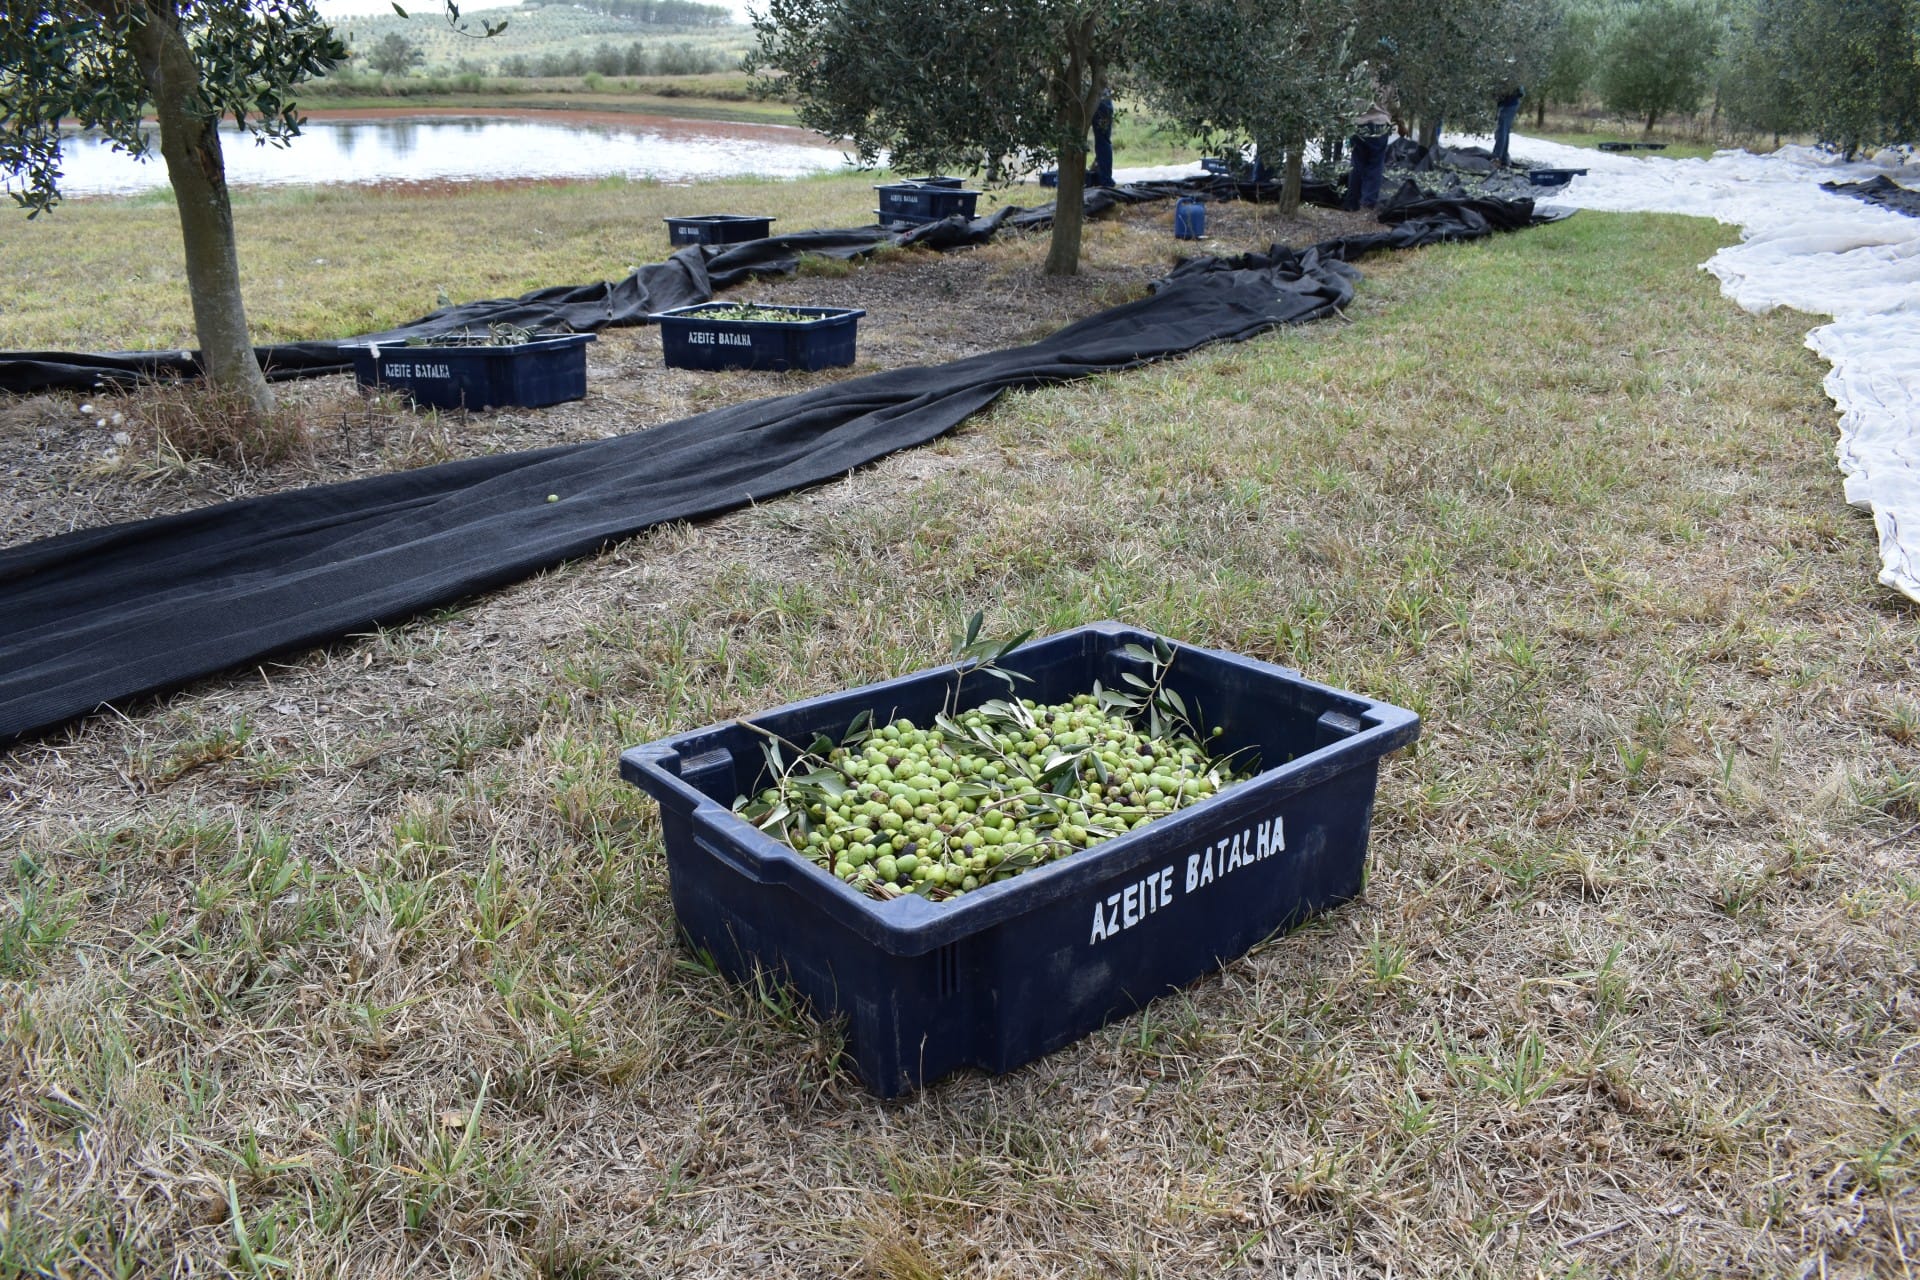 south-america-profiles-the-best-olive-oils-production-olive-oil-times